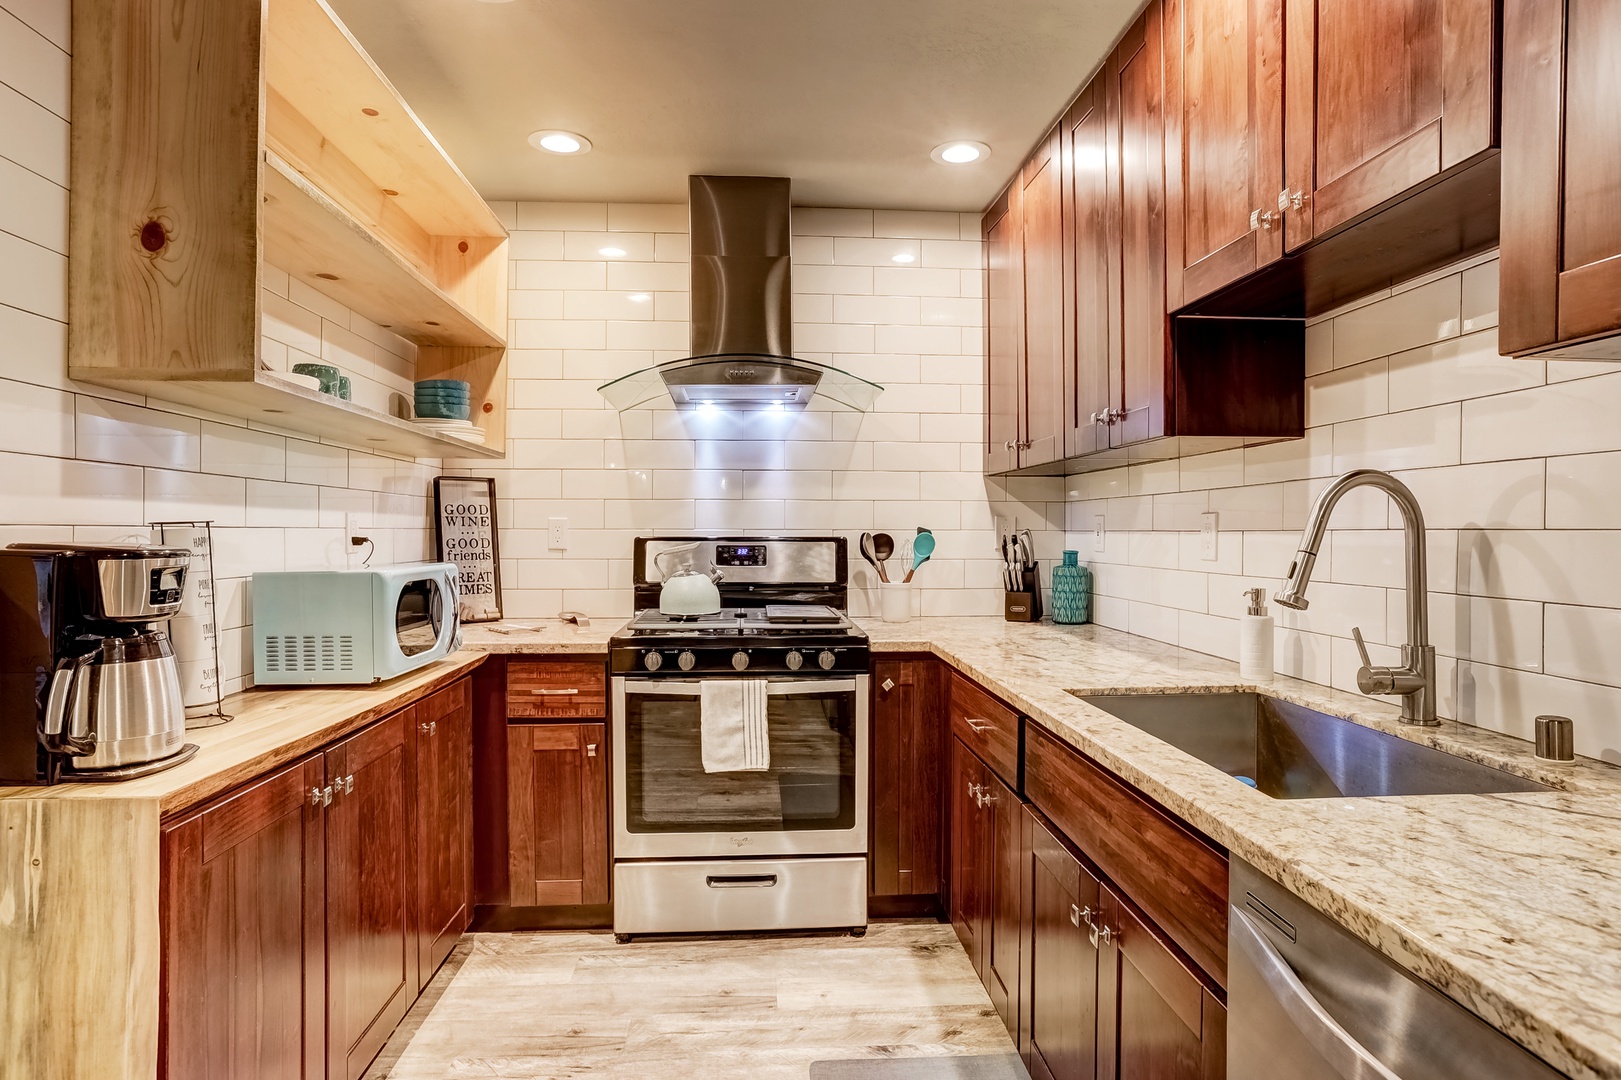 The updated, well-equipped kitchen offers ample space & amenities